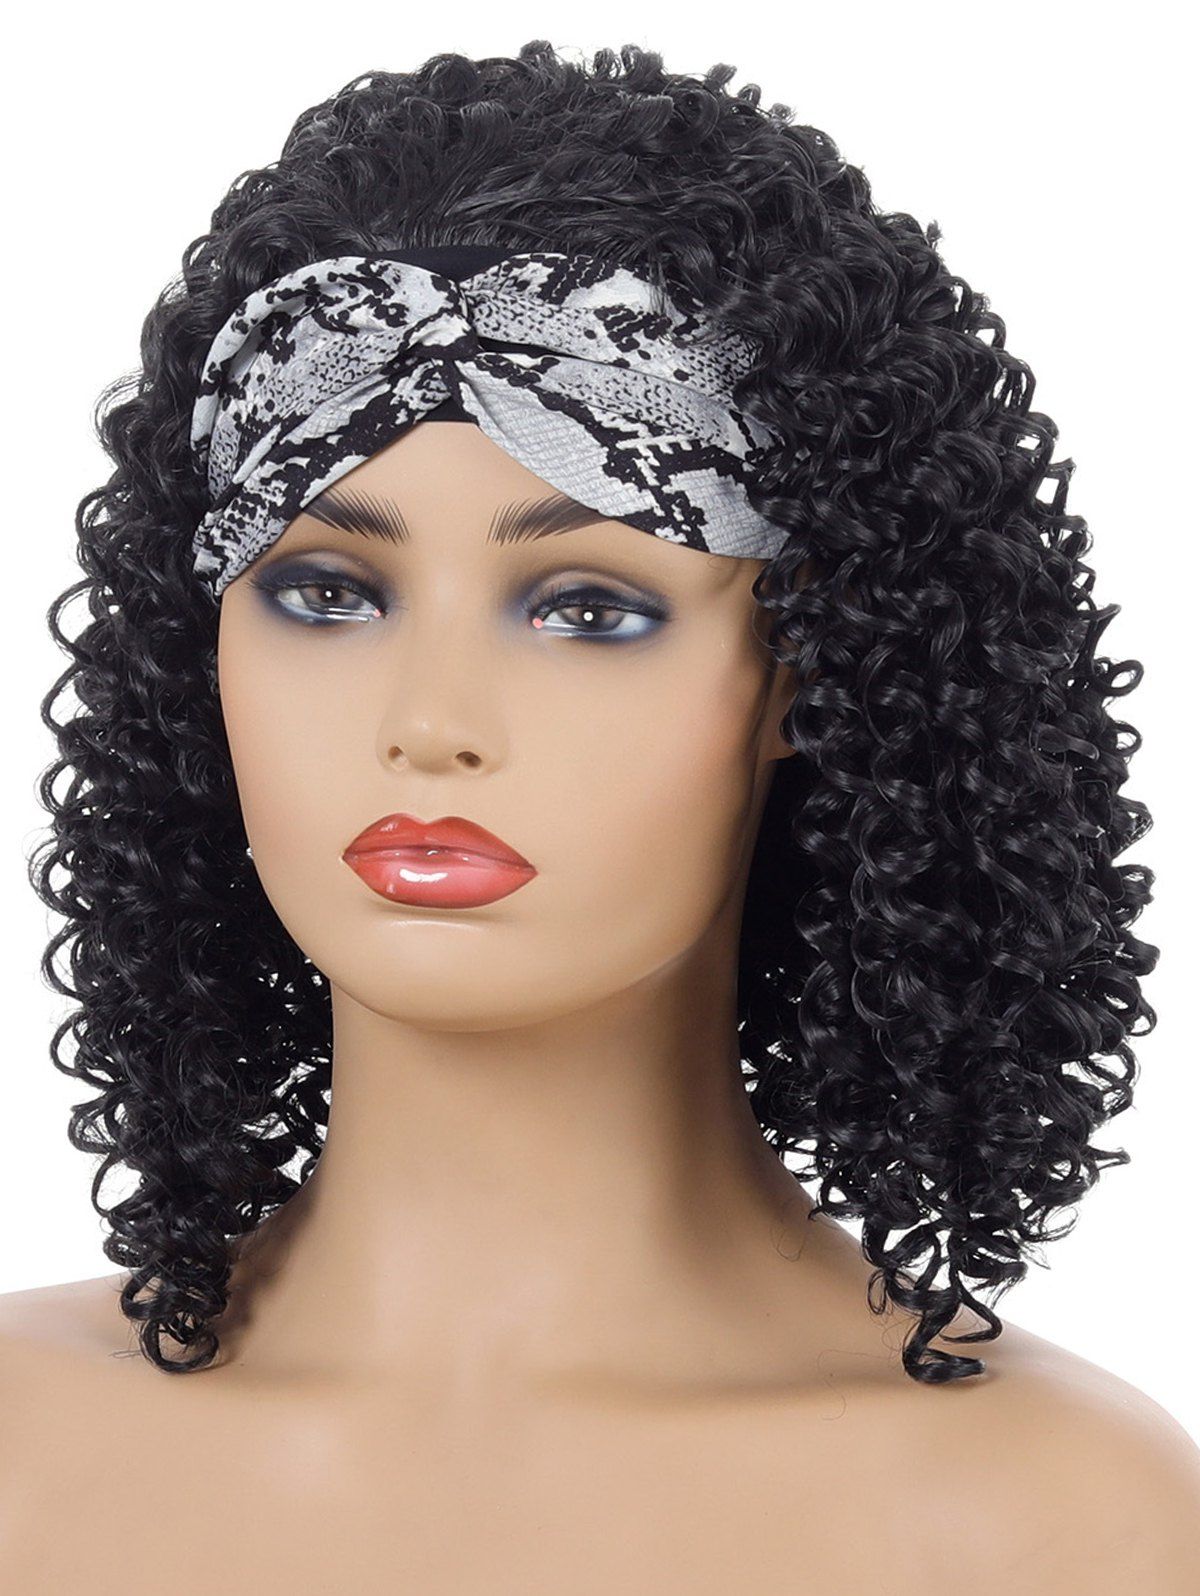 Trendy Solid Color Deep Curly Wig With Twisted Animal Print Headband Heat Resistance Synthetic Medium Hair - BLACK 